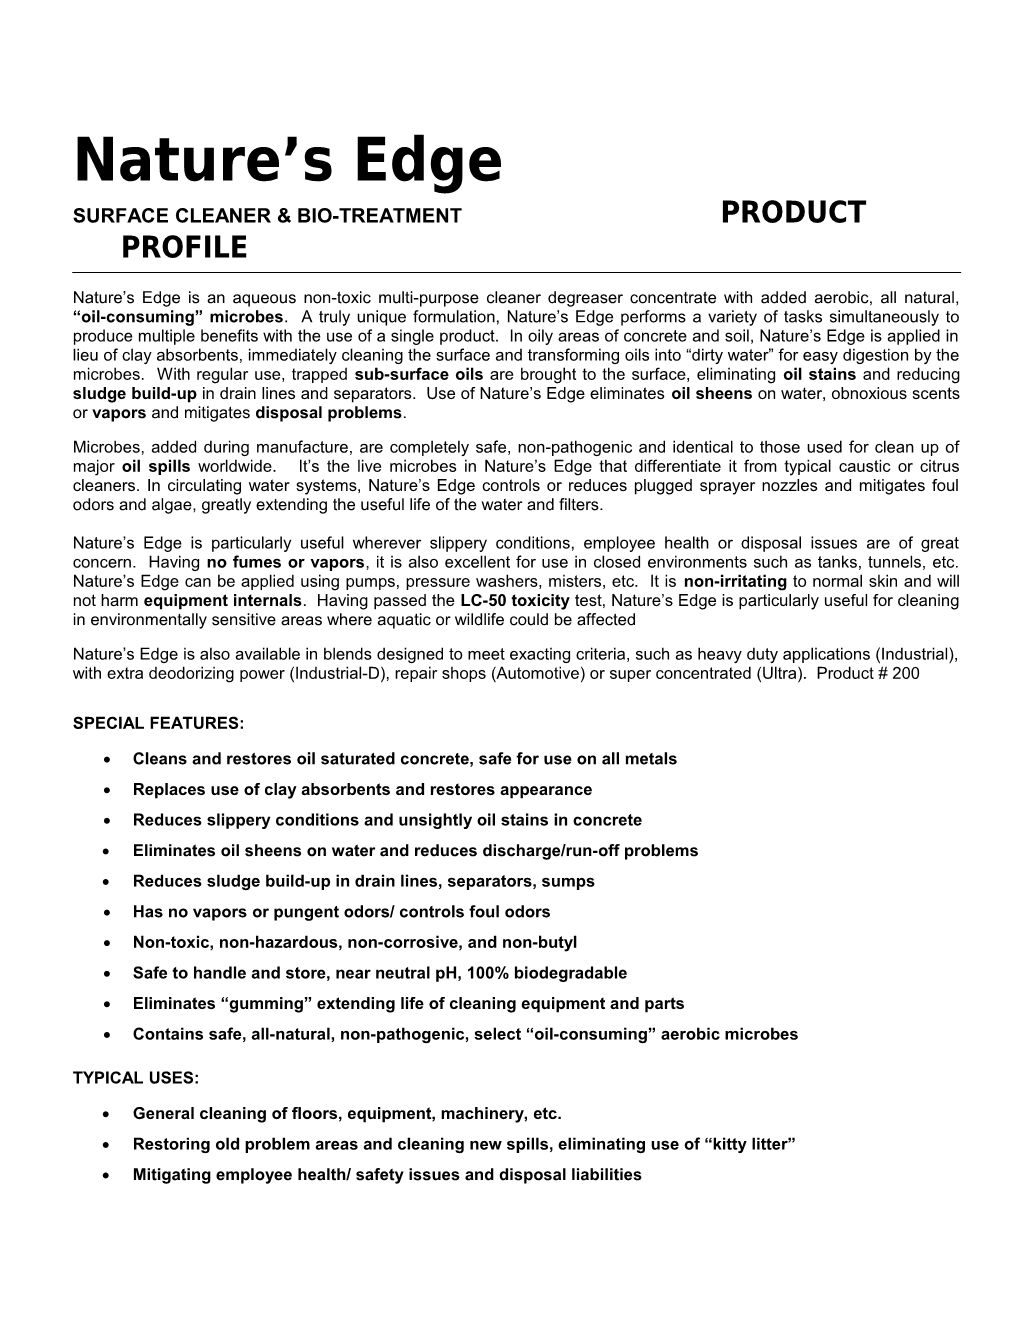 Surface Cleaner & Bio-Treatment Product Profile